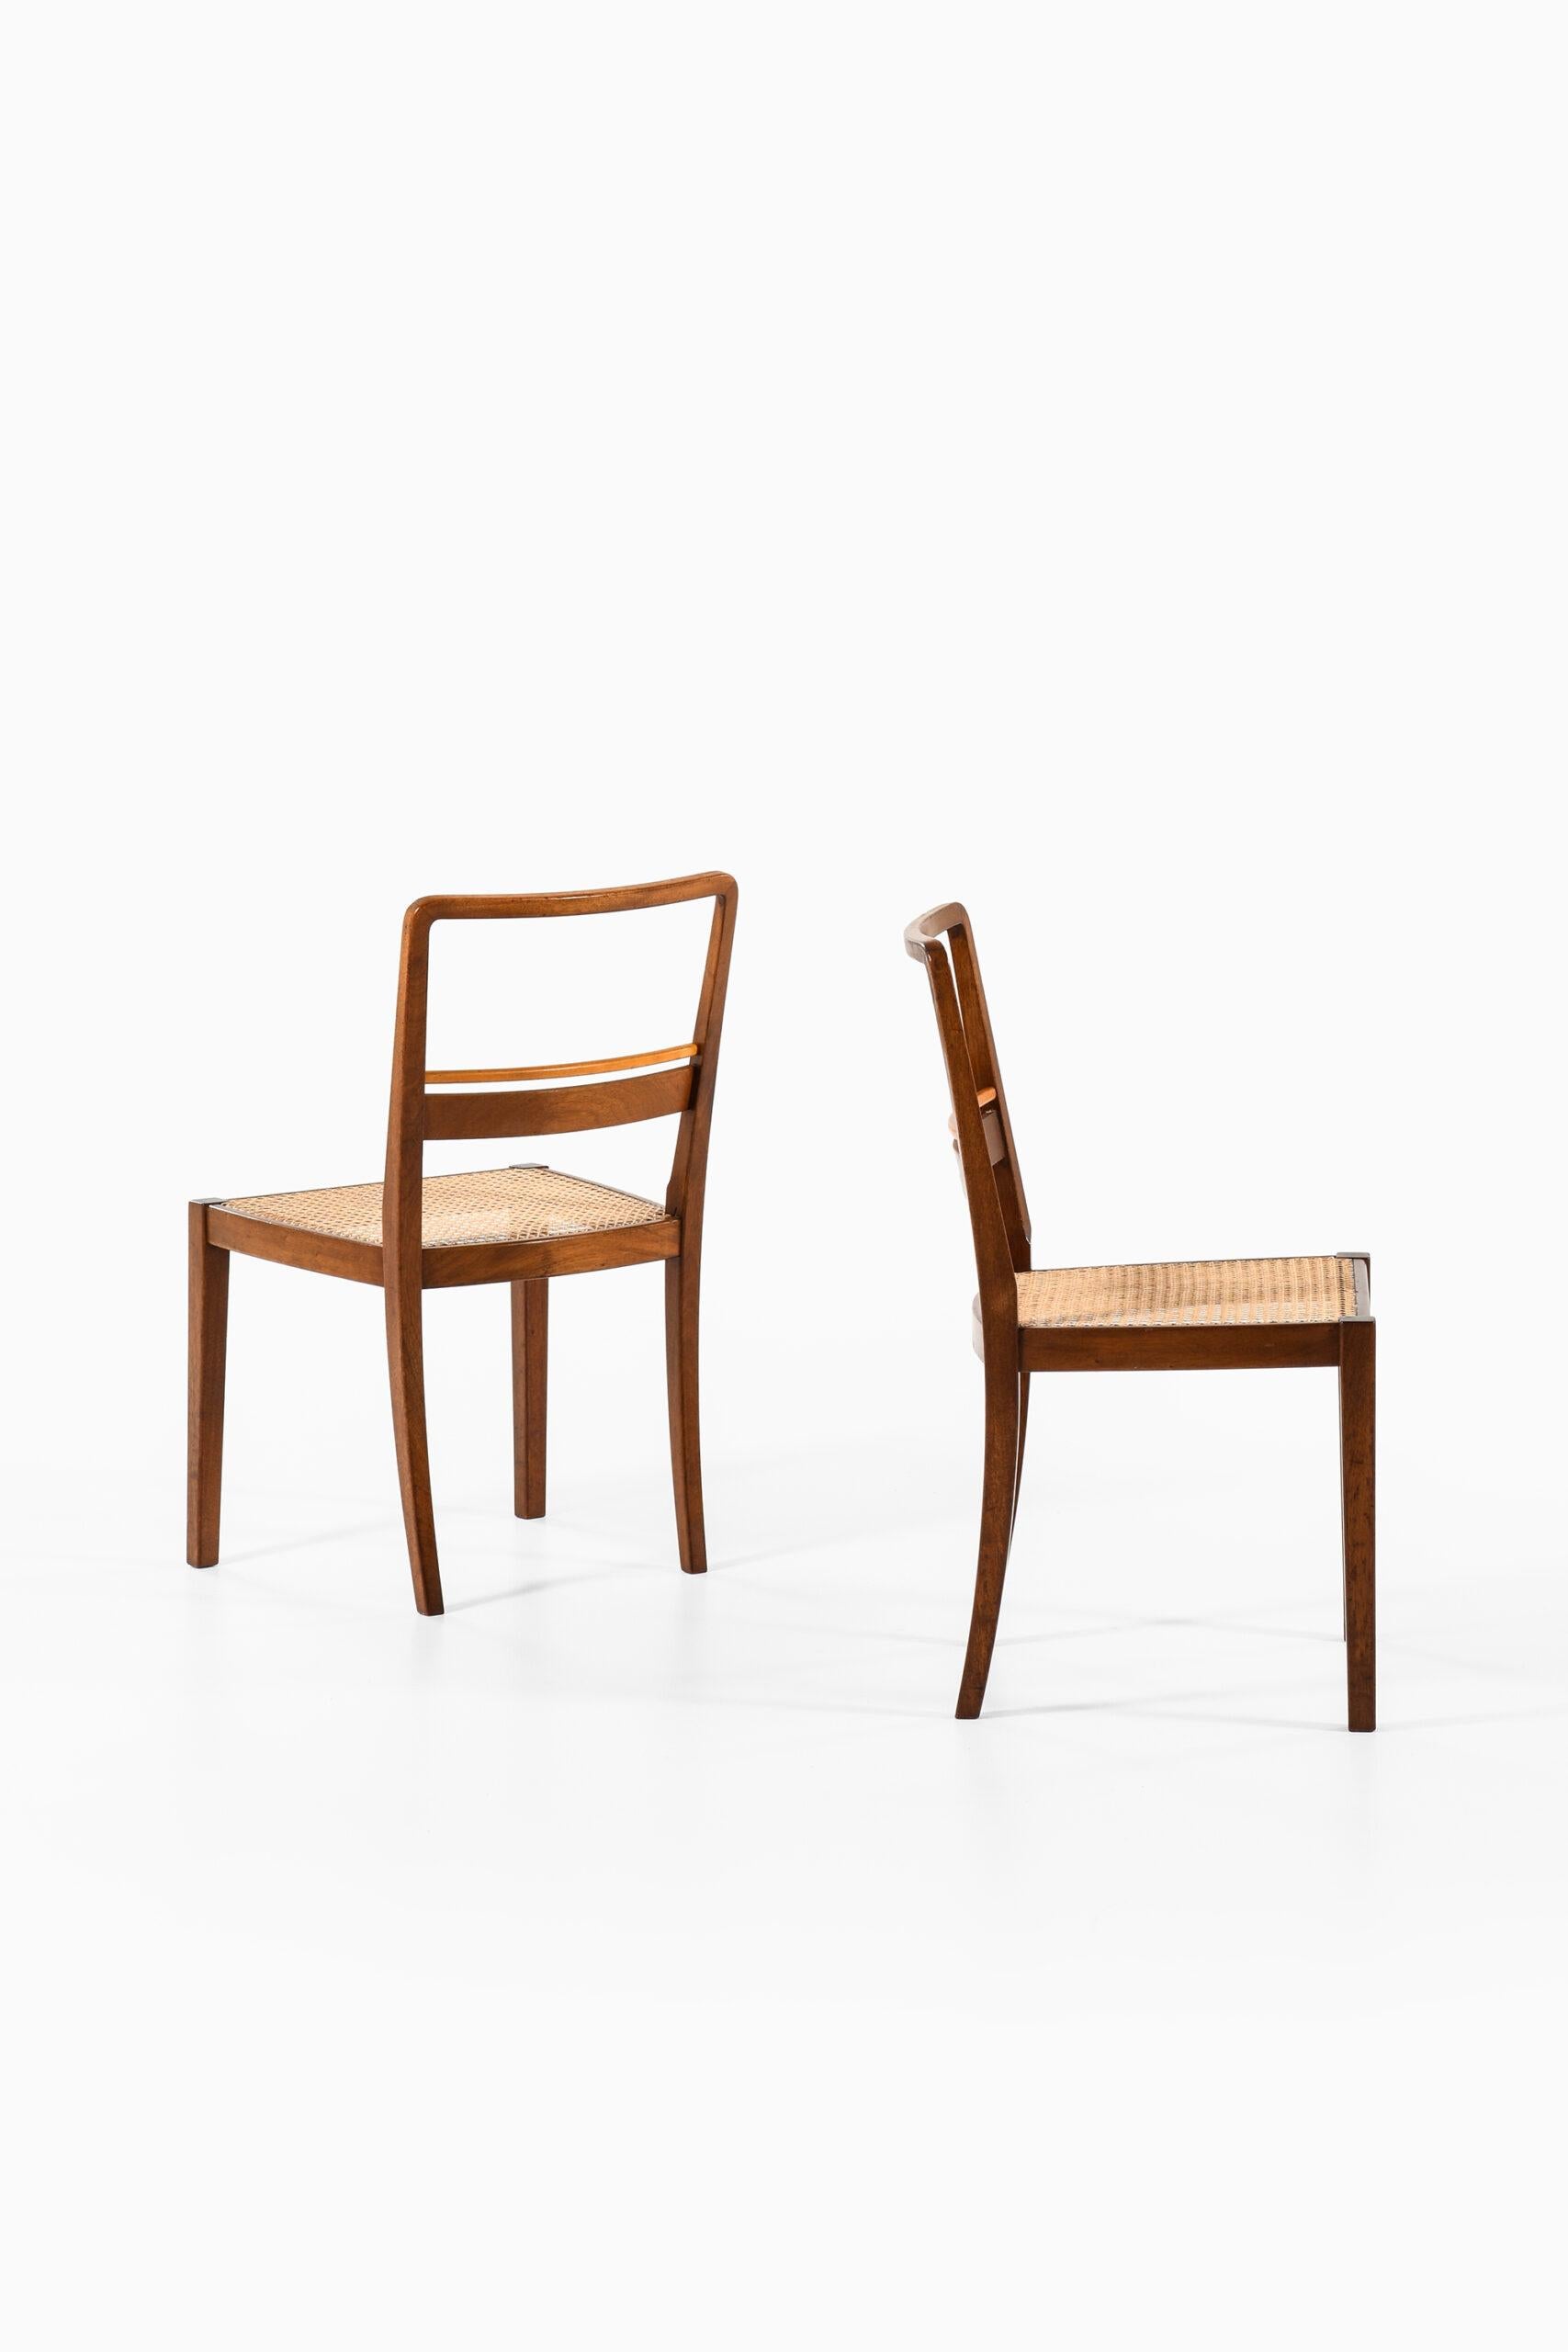 Mid-20th Century Erik Chambert Dining Chairs Produced by AB Chamberts Möbelfabrik in Norrköping For Sale